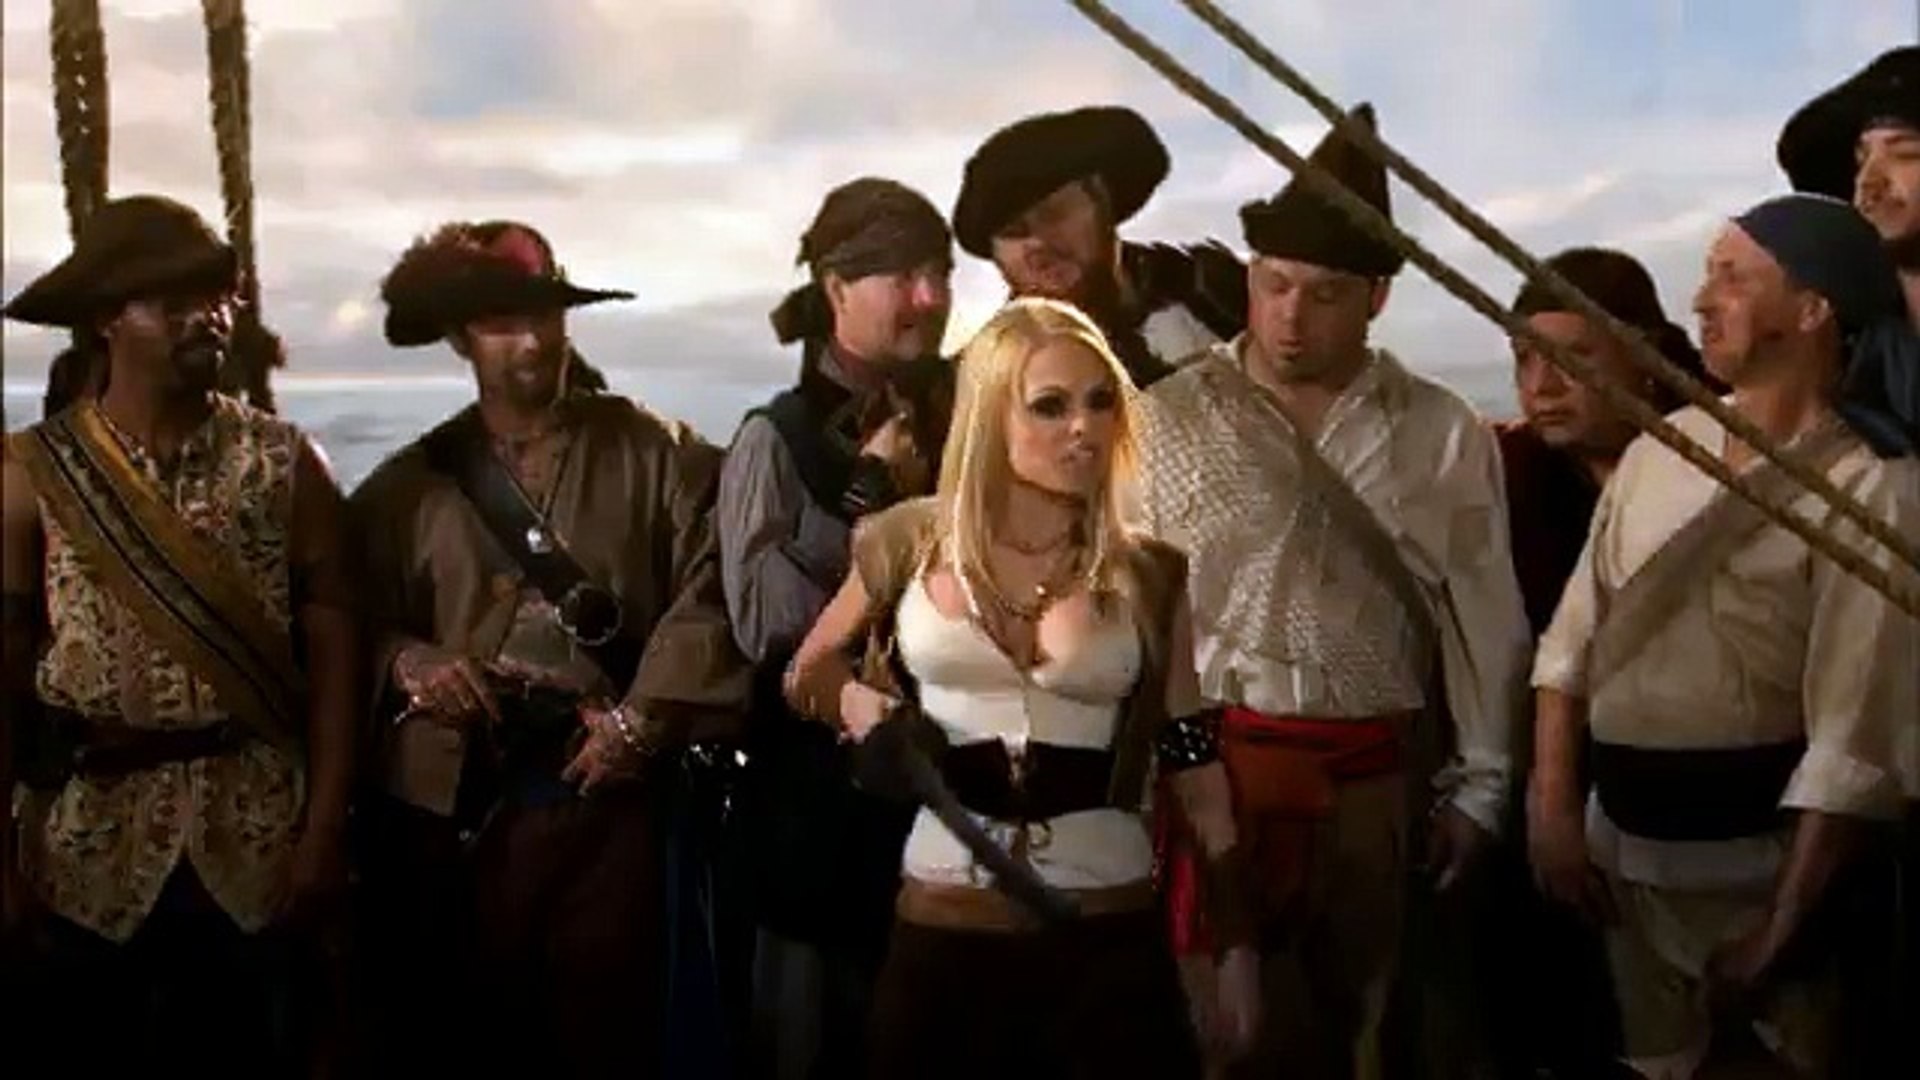 carlos camey recommends watch pirates 2 online pic